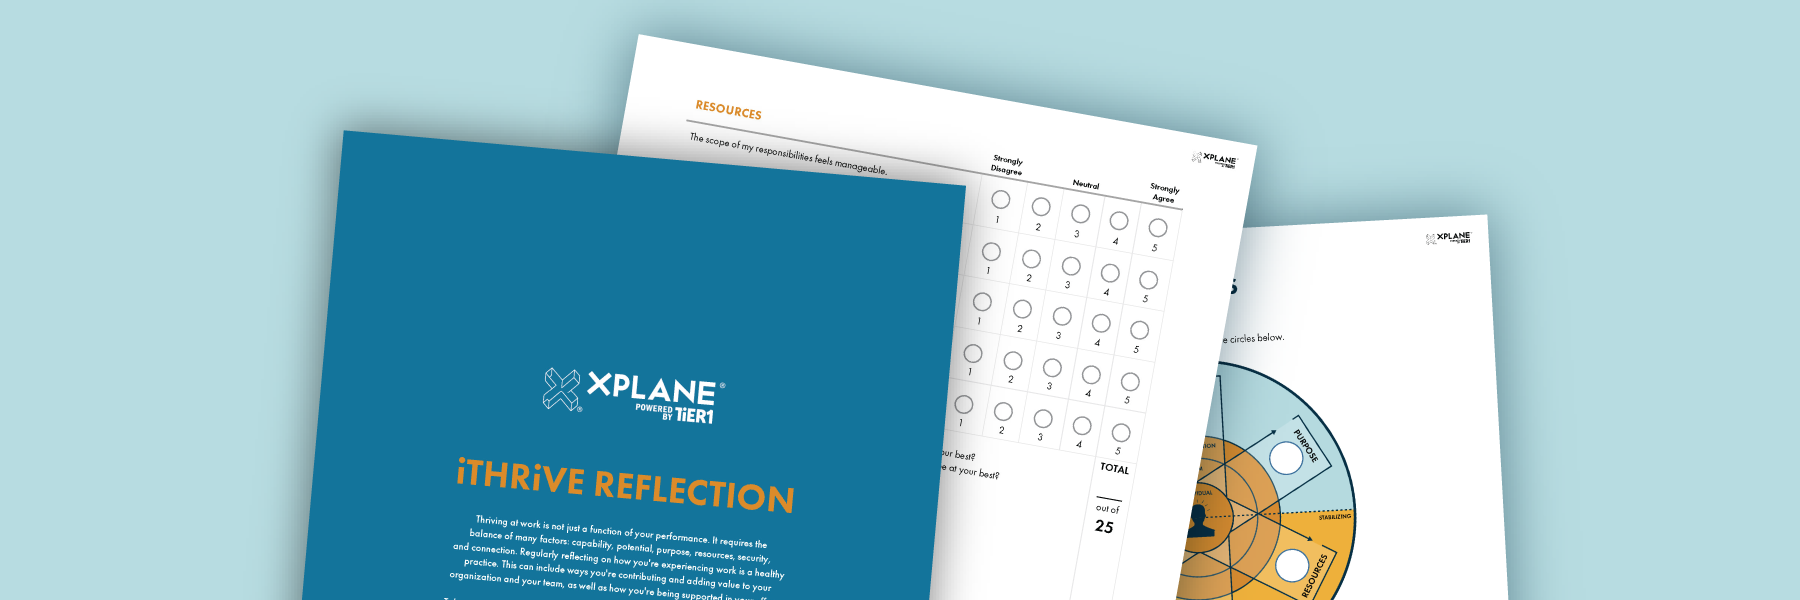 View of three pages from reflection tool stacked on top of each other. Against a light blue background.